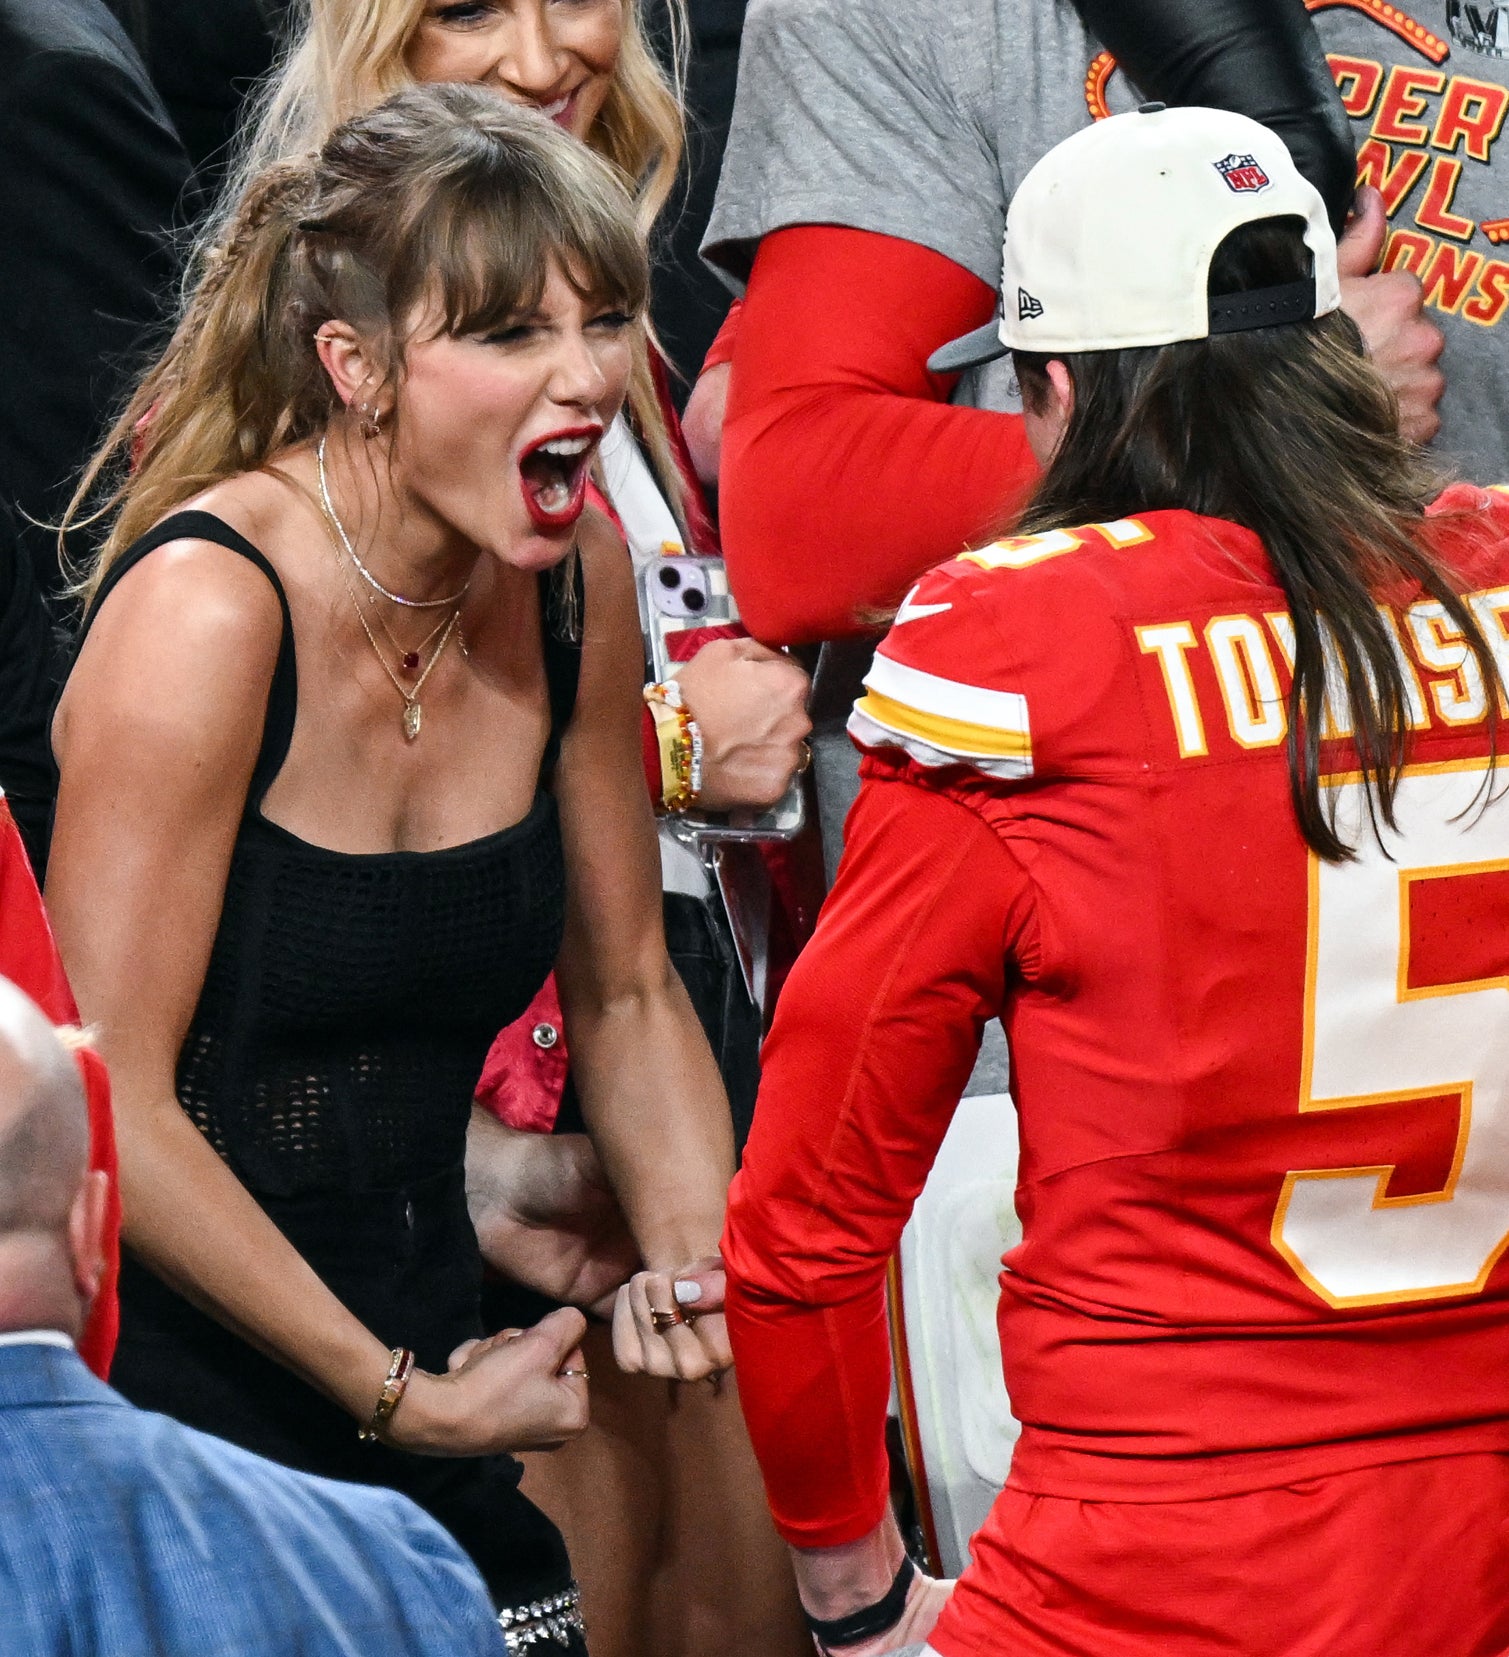 Taylor Swift in a top cheering with a person wearing a Kansas City Chiefs #15 jersey